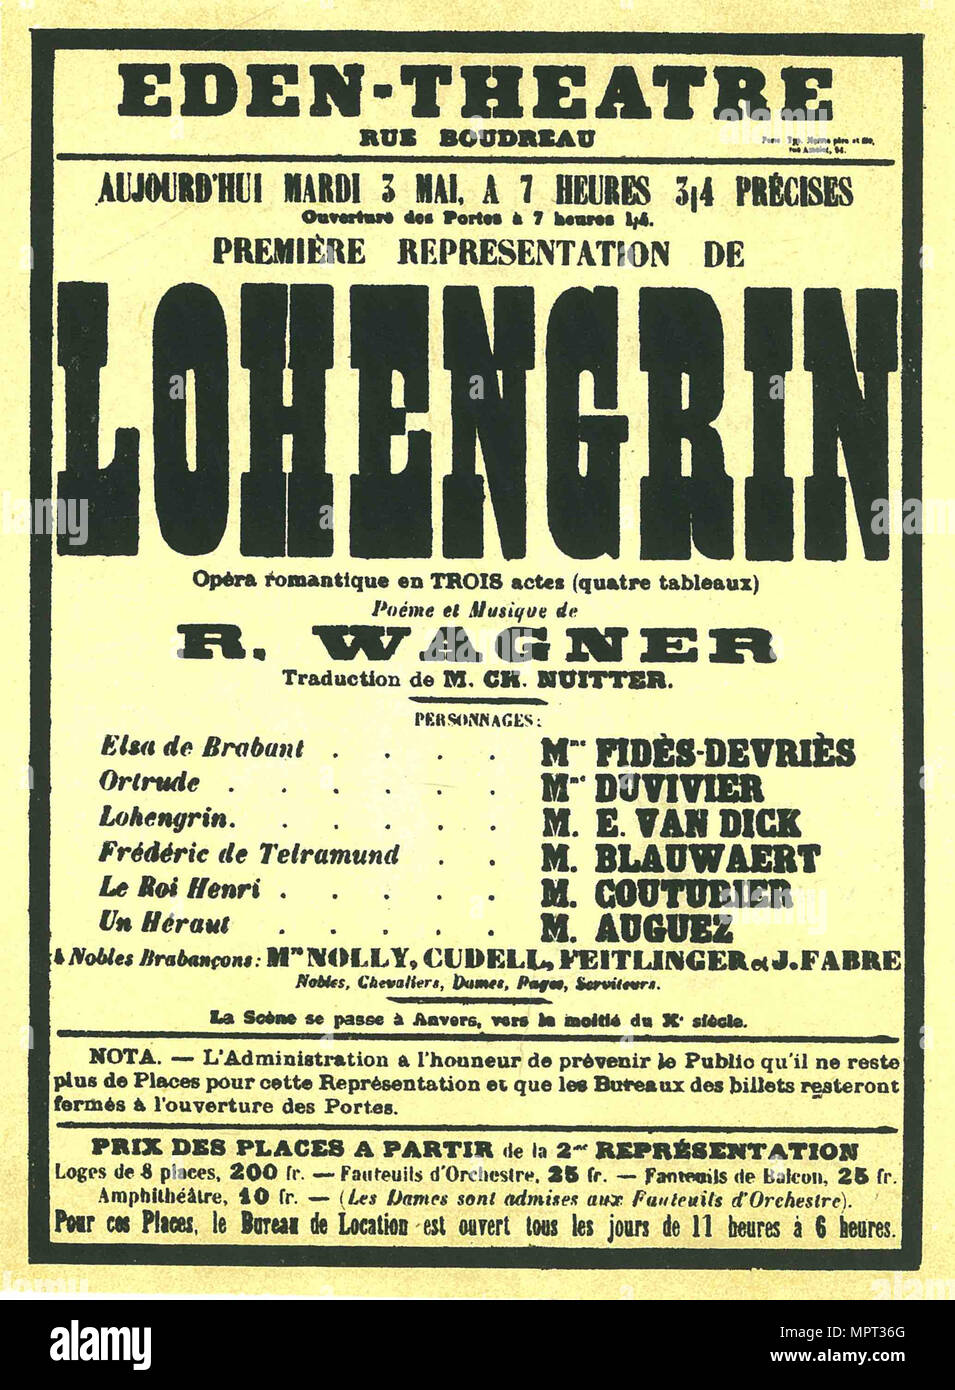 Premiere Poster for the opera Lohengrin by Richard Wagner in the Éden Théâtre, Paris, 1887. Stock Photo